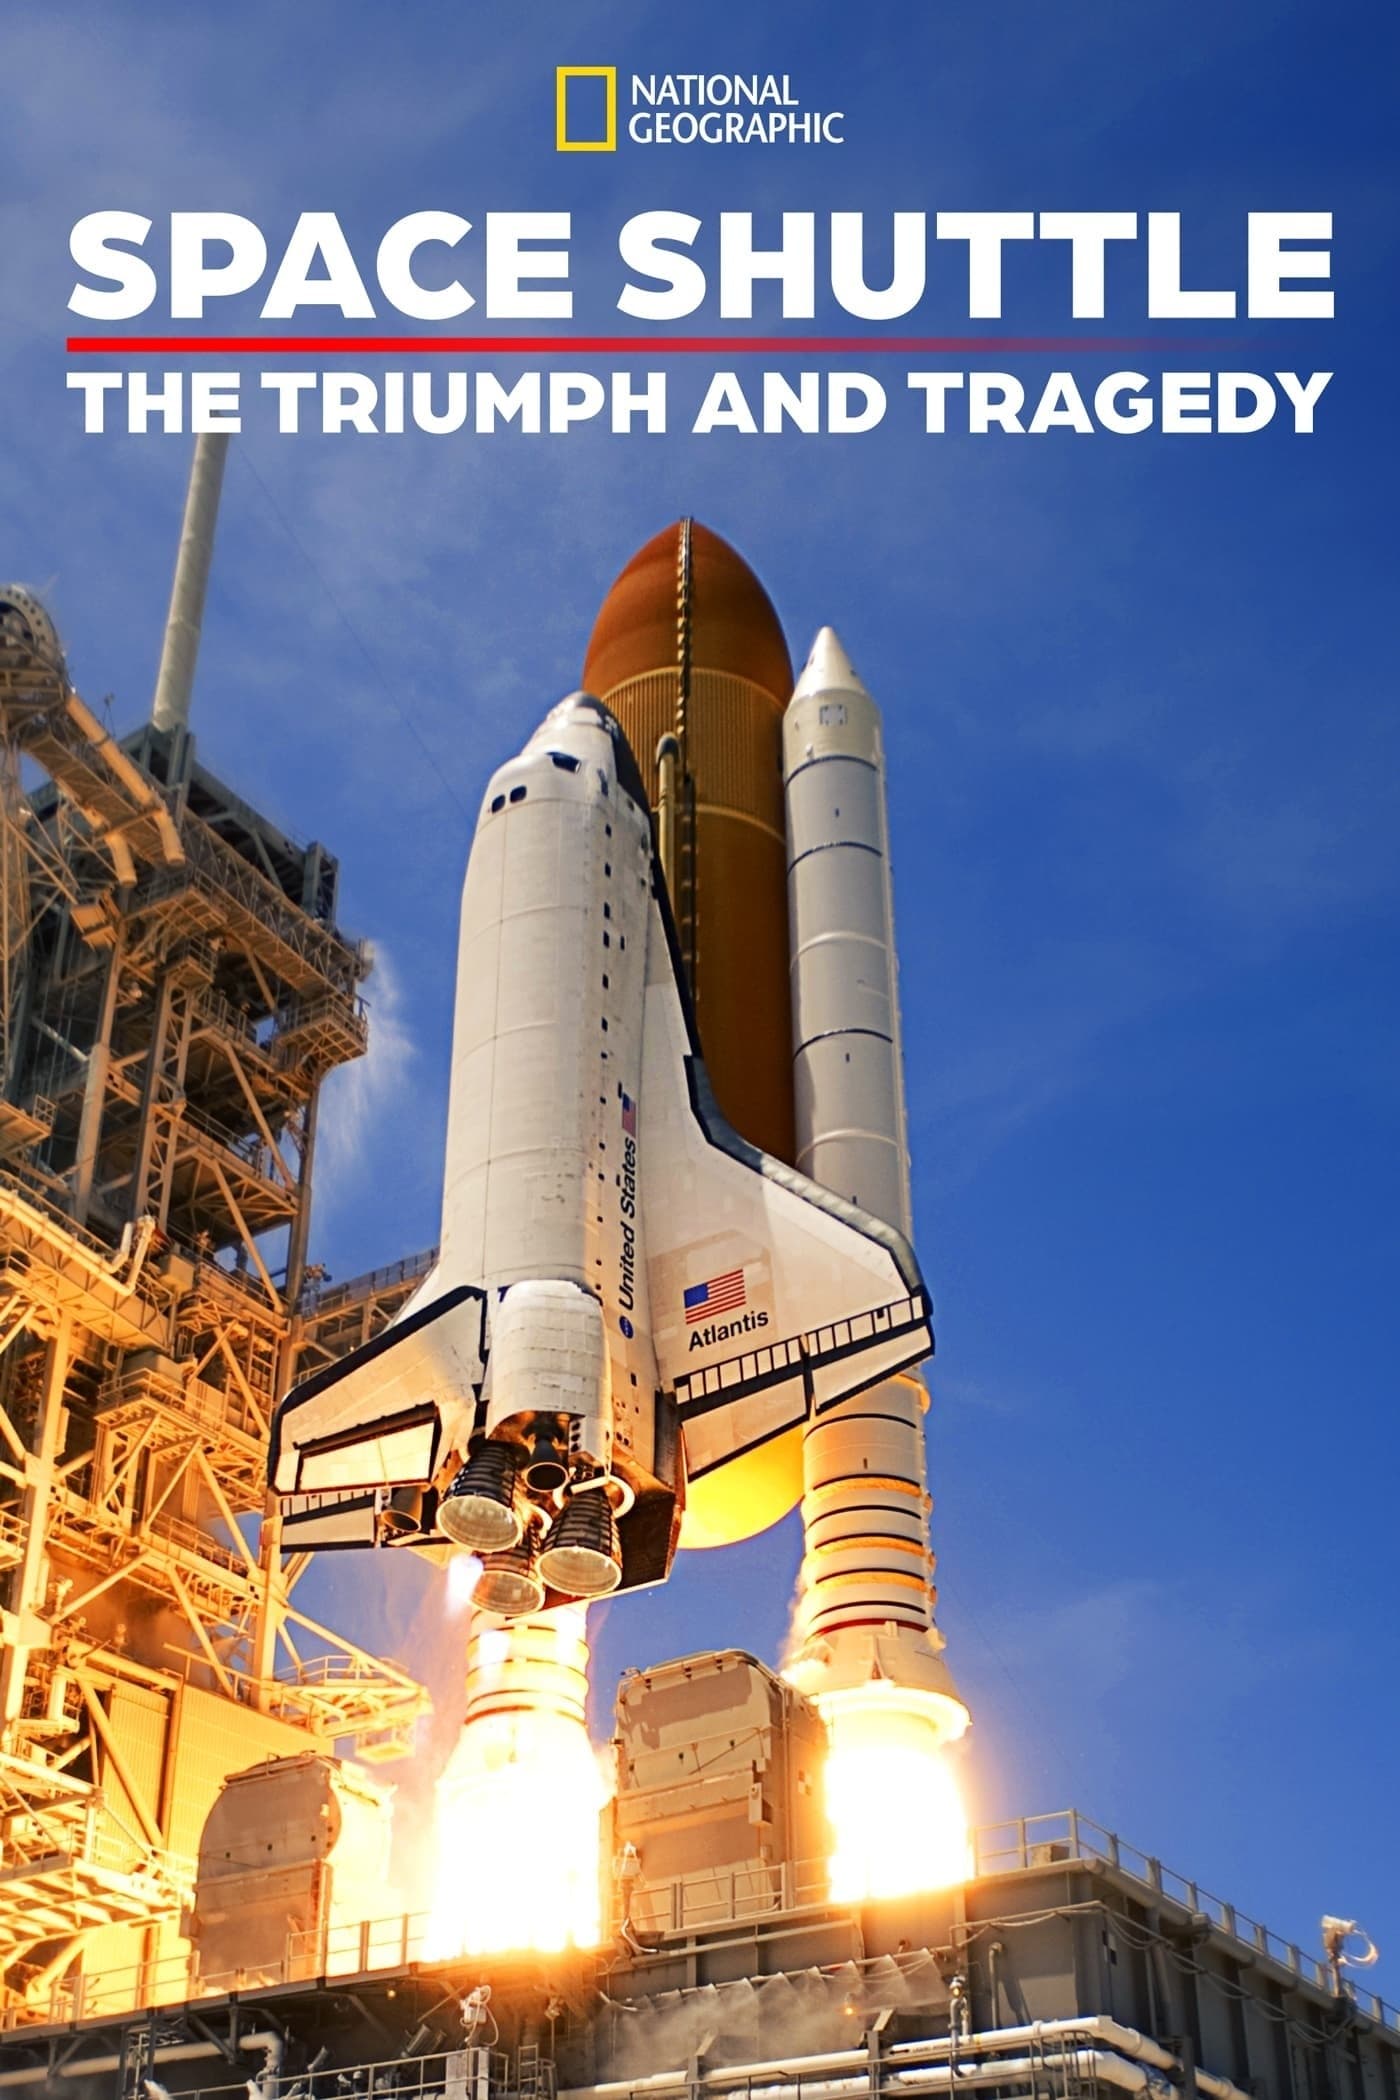 The Space Shuttle: Triumph and Tragedy (2018)